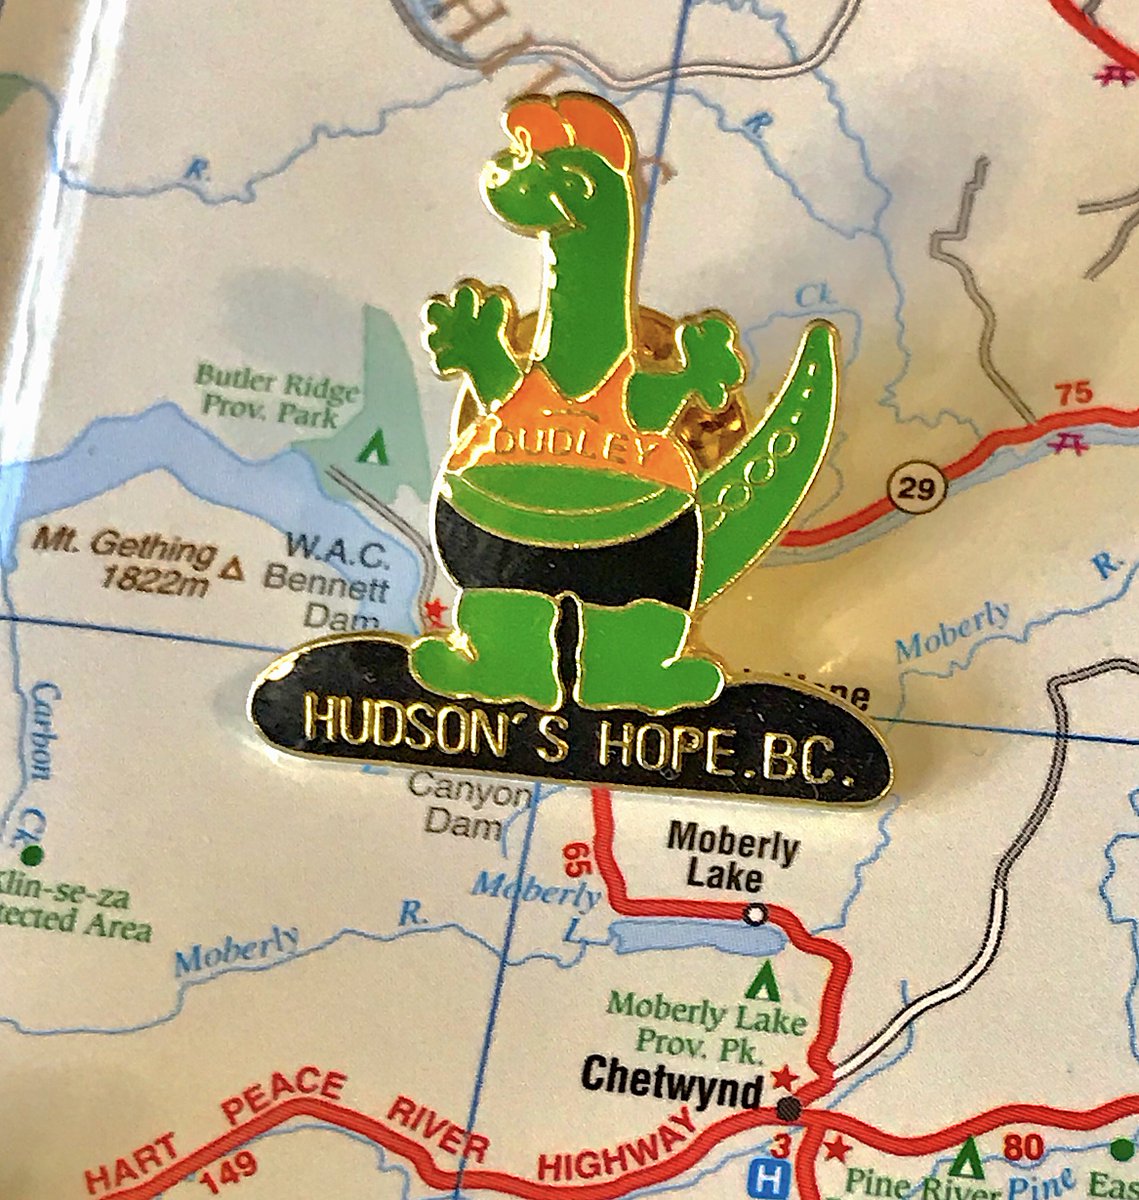 2. HUDSON'S HOPE- Dudley is now my best friend - Crop top + shorts combo is interesting, but I'll allow it- Example of how simplicity is a virtue- Alternative pin is also great, "Land of Dinosaurs and Dams" is fantastic